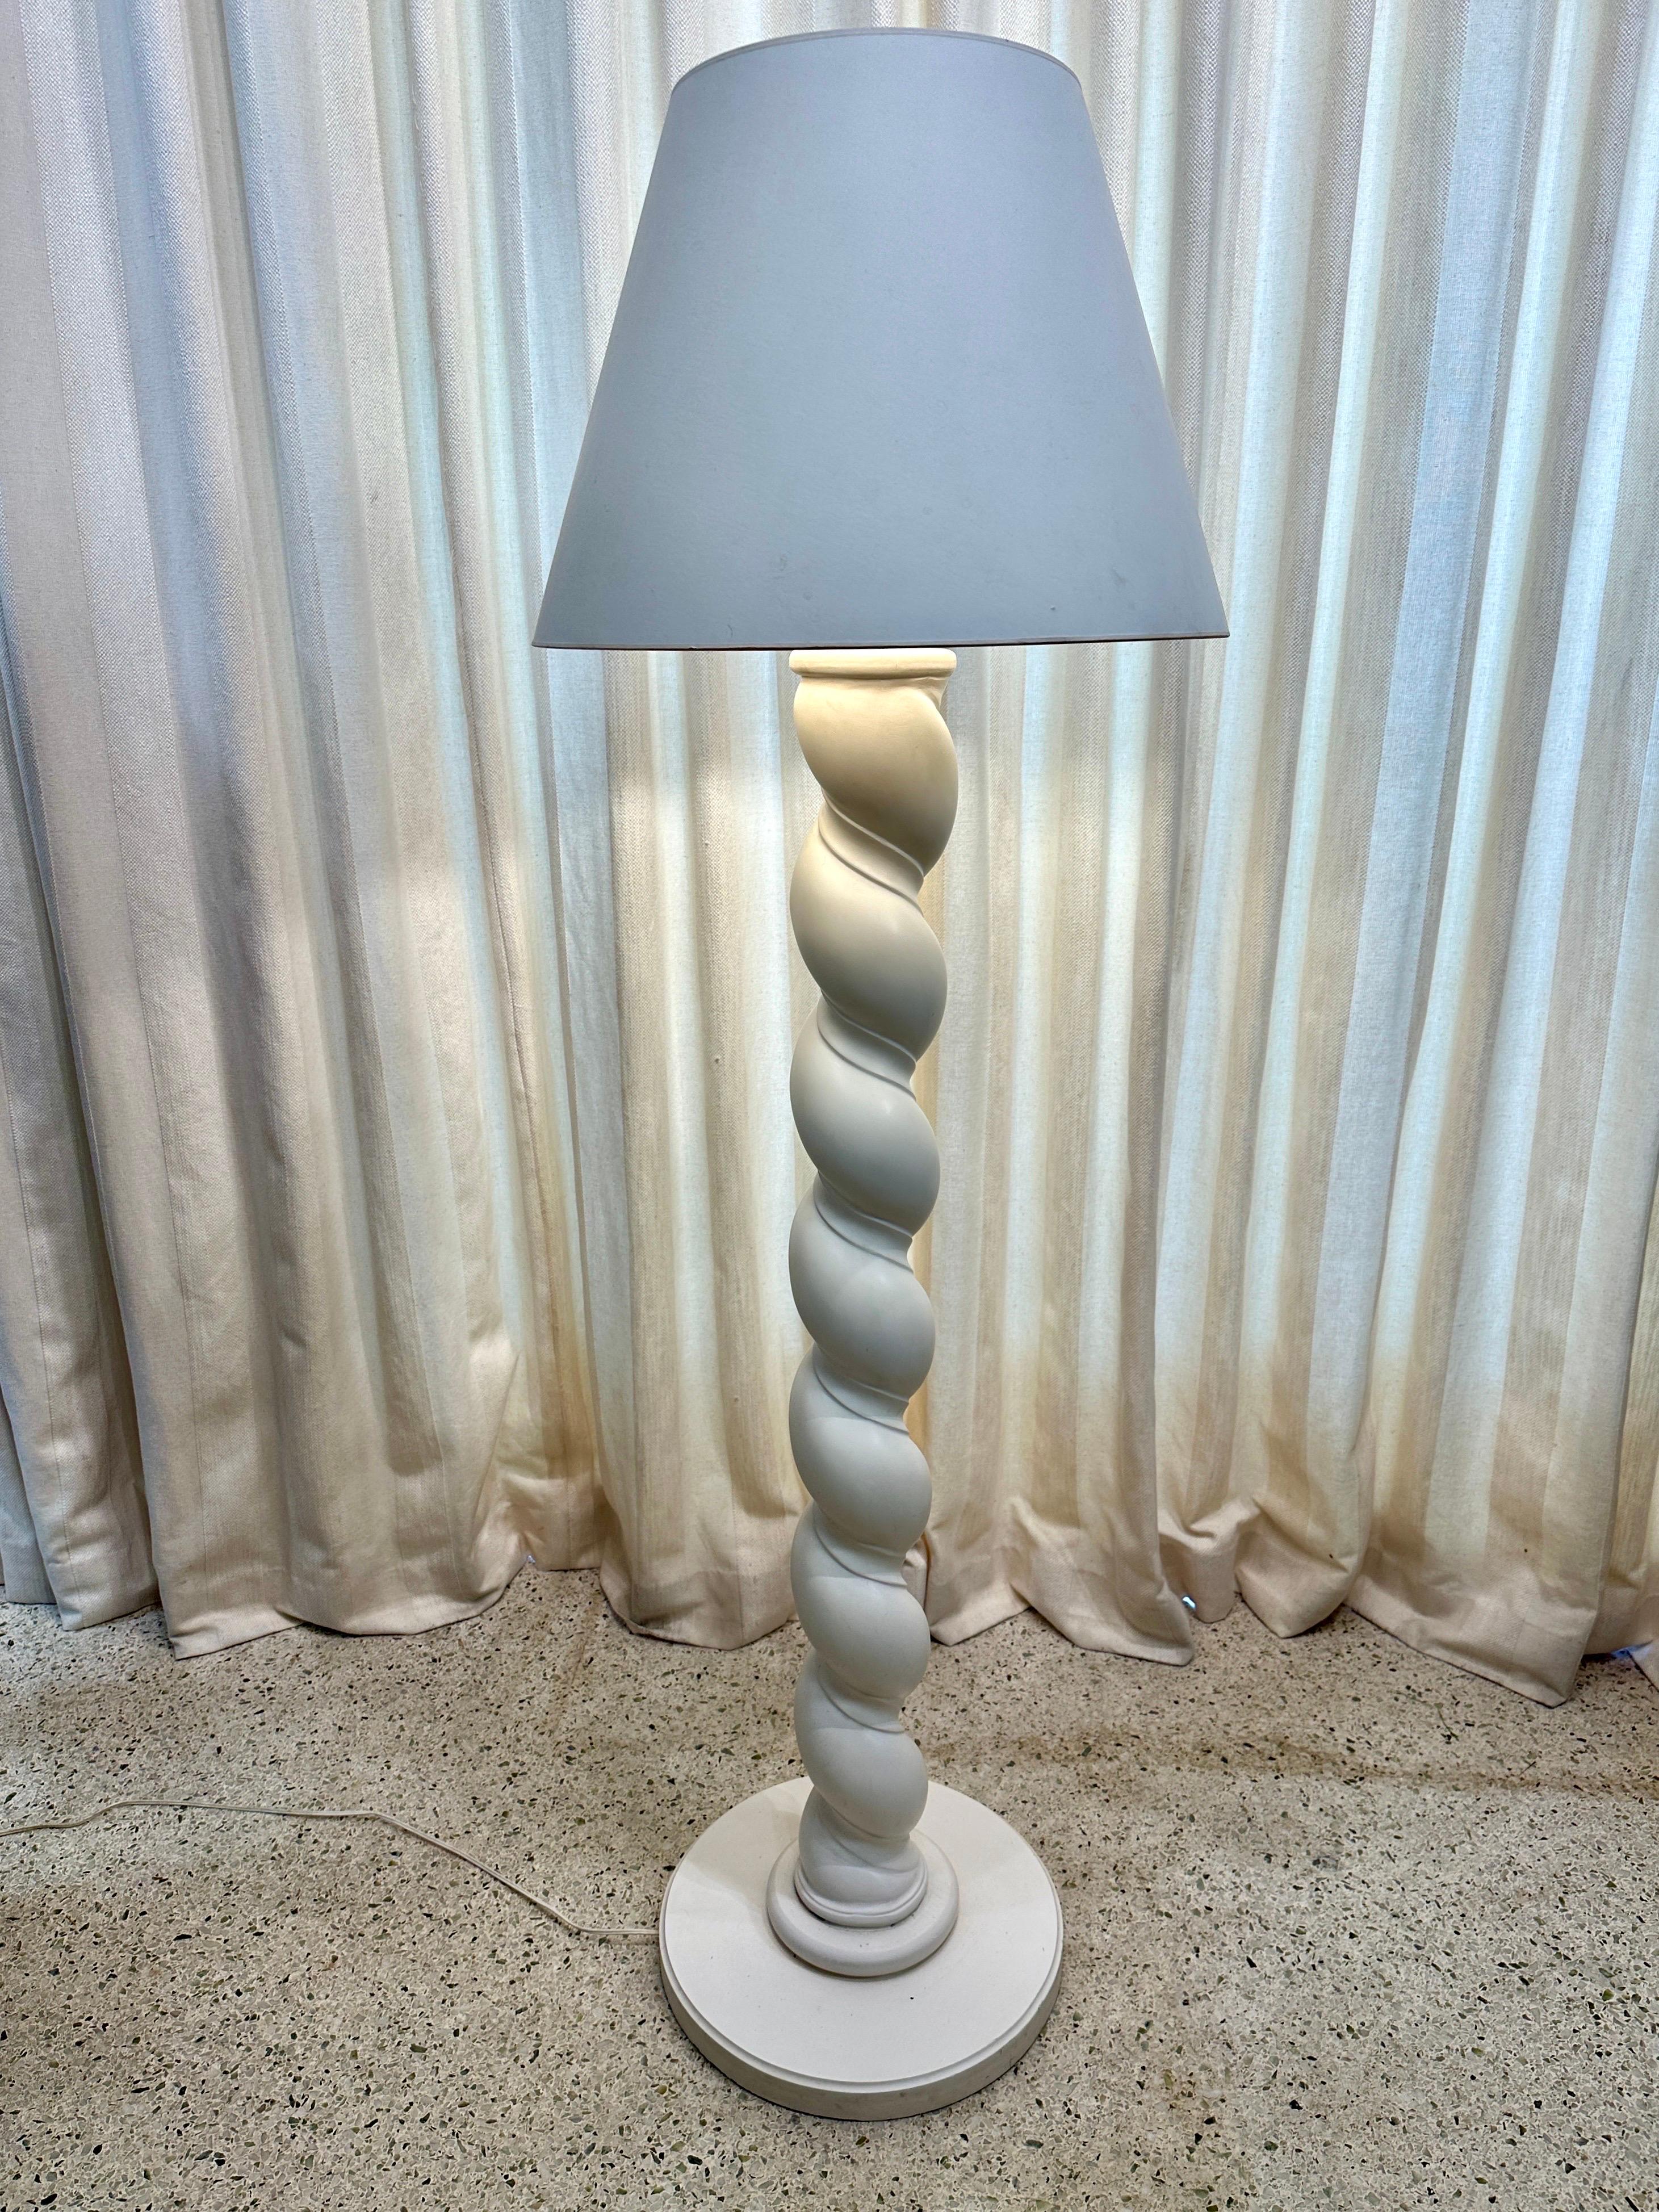 American Extremely Rare Composition Plaster Floor Lamp w/ Spiraling Design by Sirmos For Sale